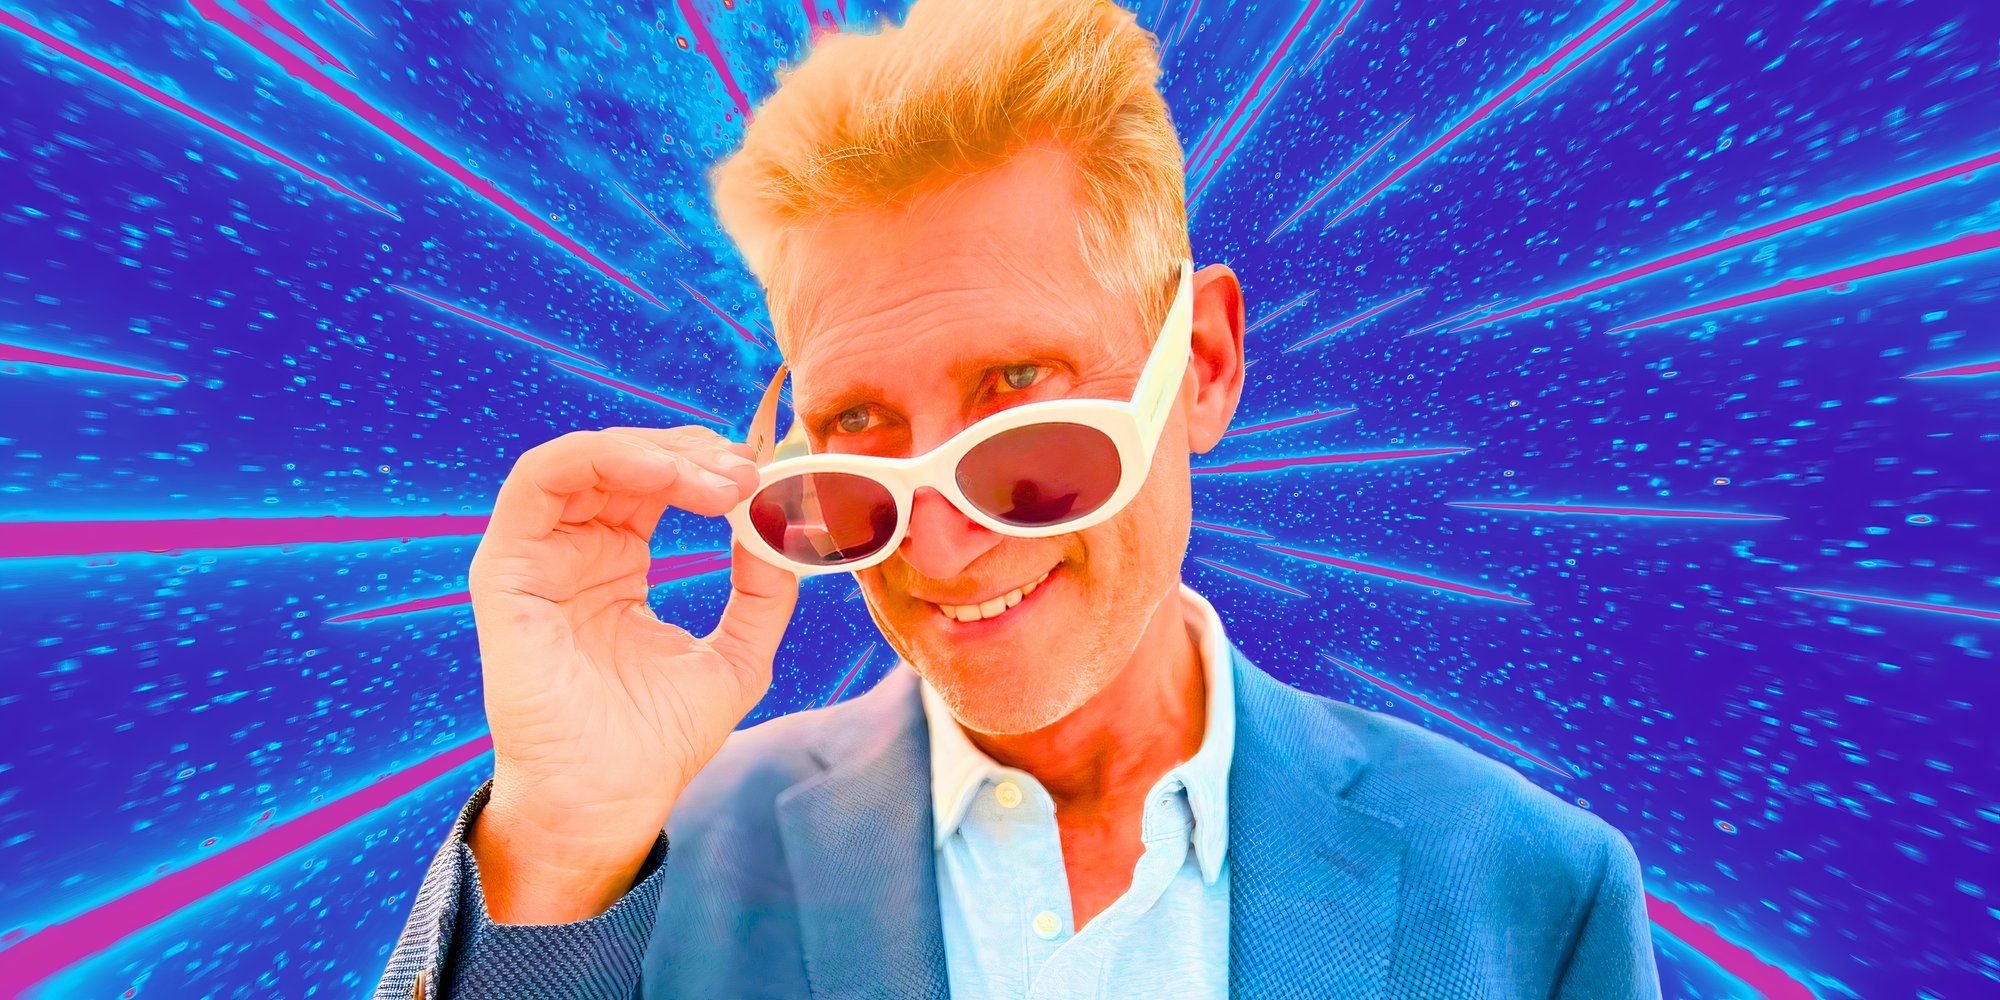 image of gerry turner with white sunglasses on and blue background